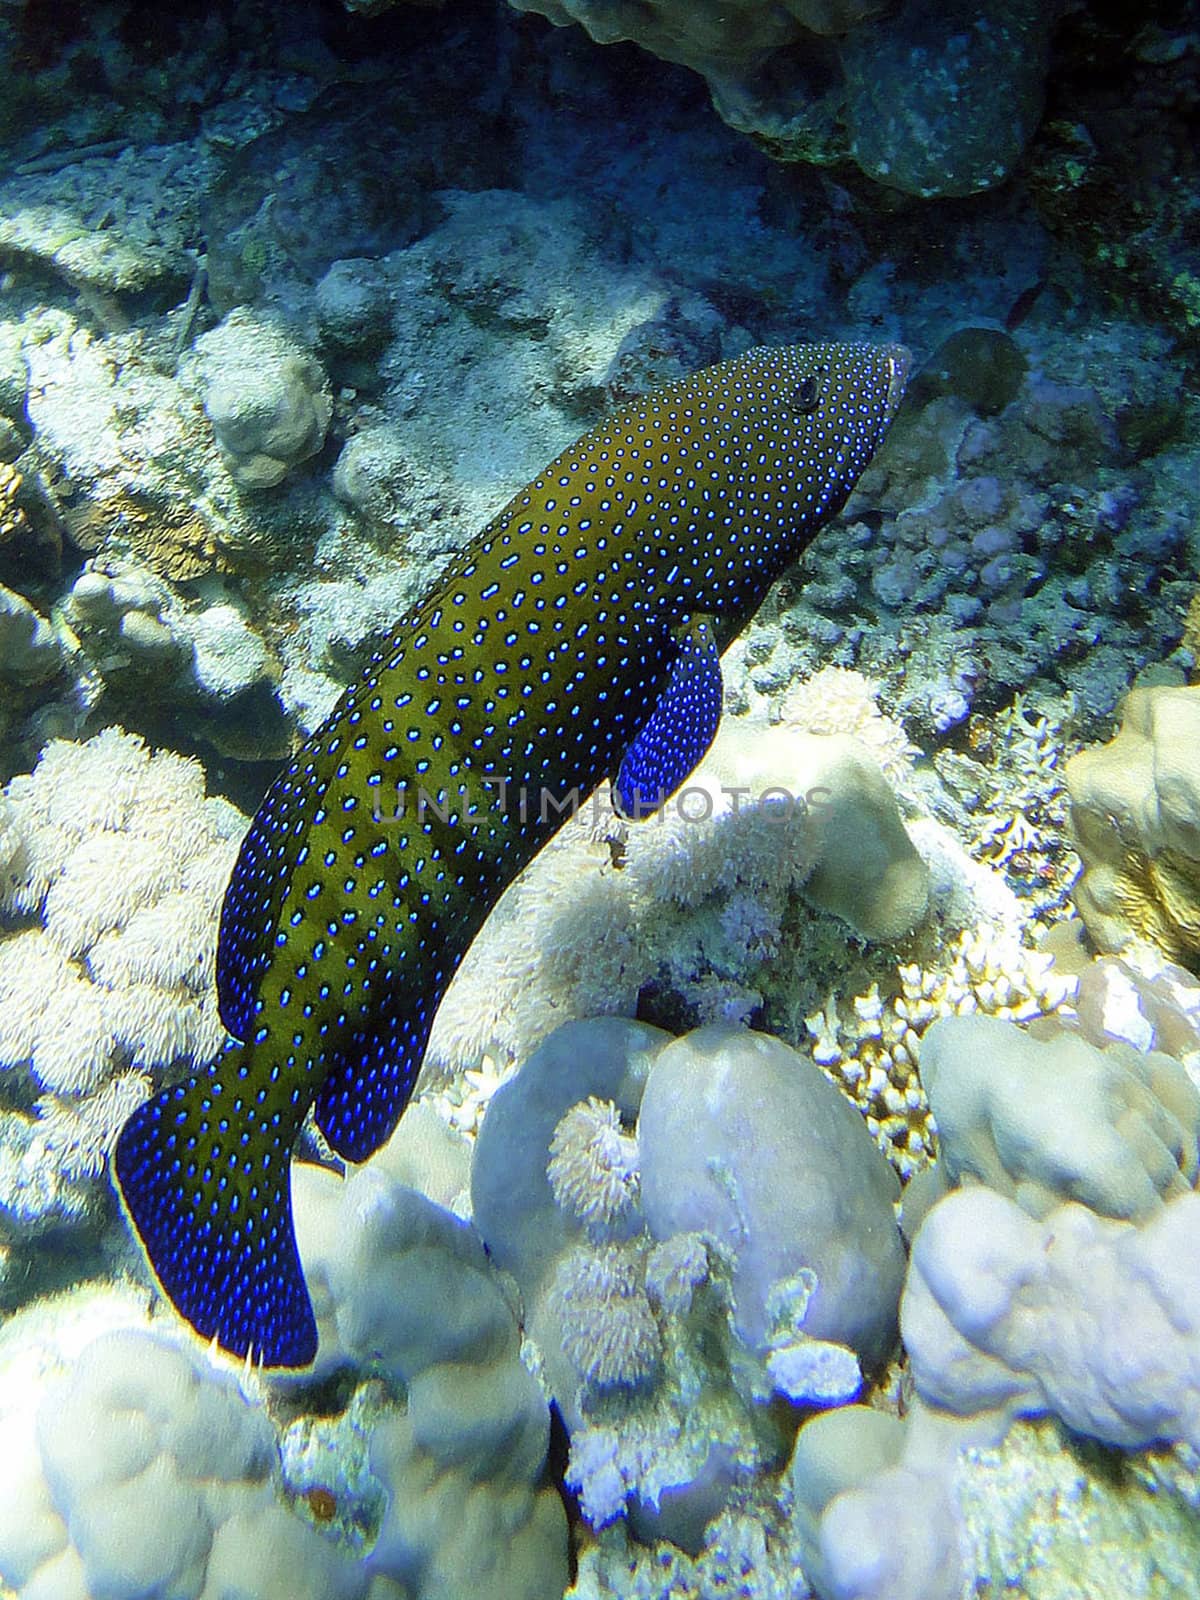 Grouper by georg777